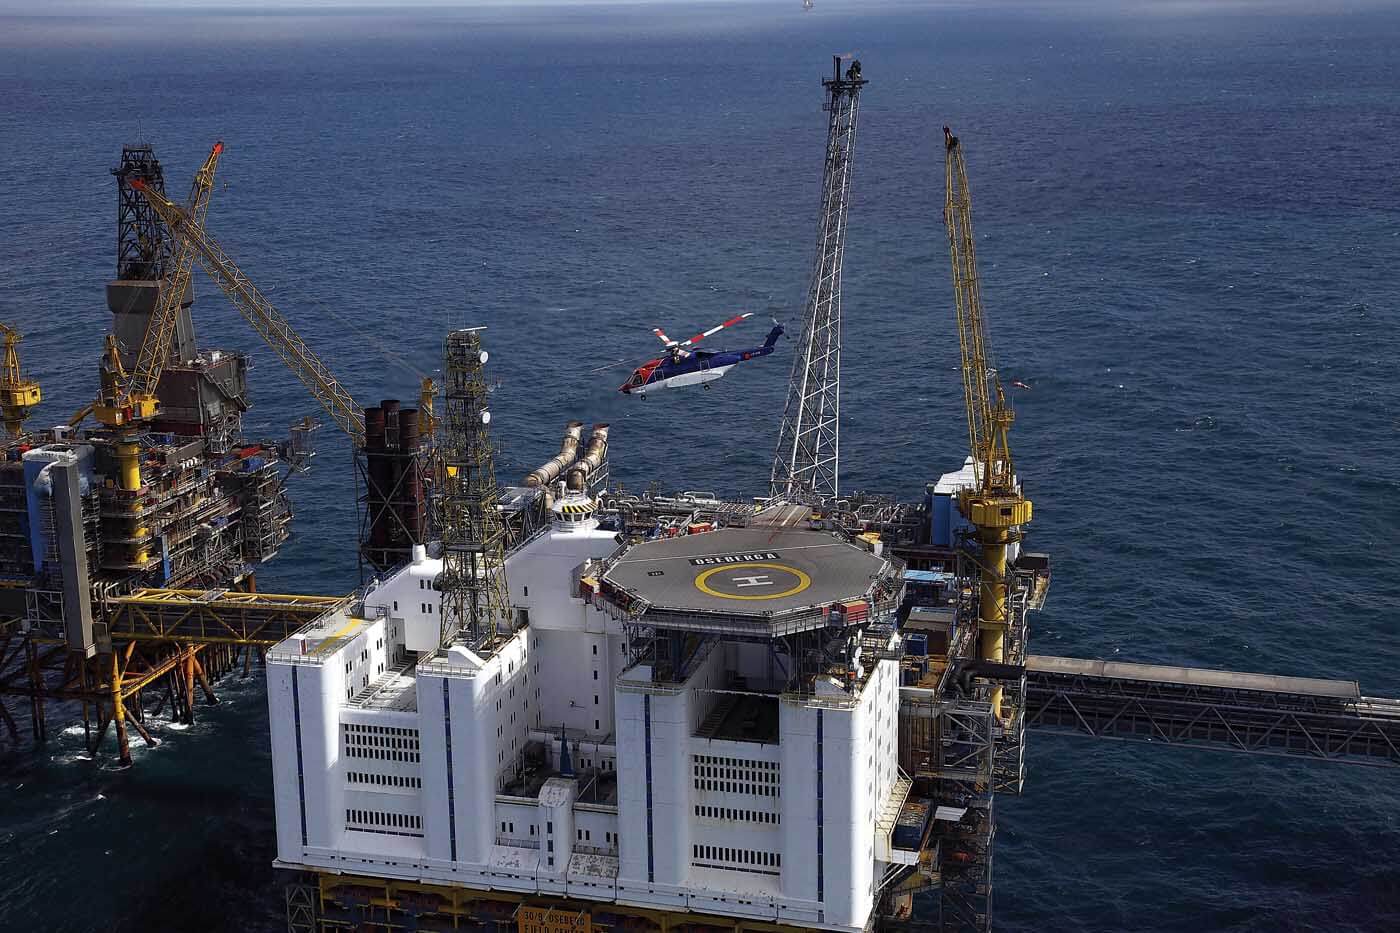 FDM has long since become a contract requirement for offshore oil-and-gas operators, but few customers outside of the offshore sector are aware of or interested in FDM. CHC Photo